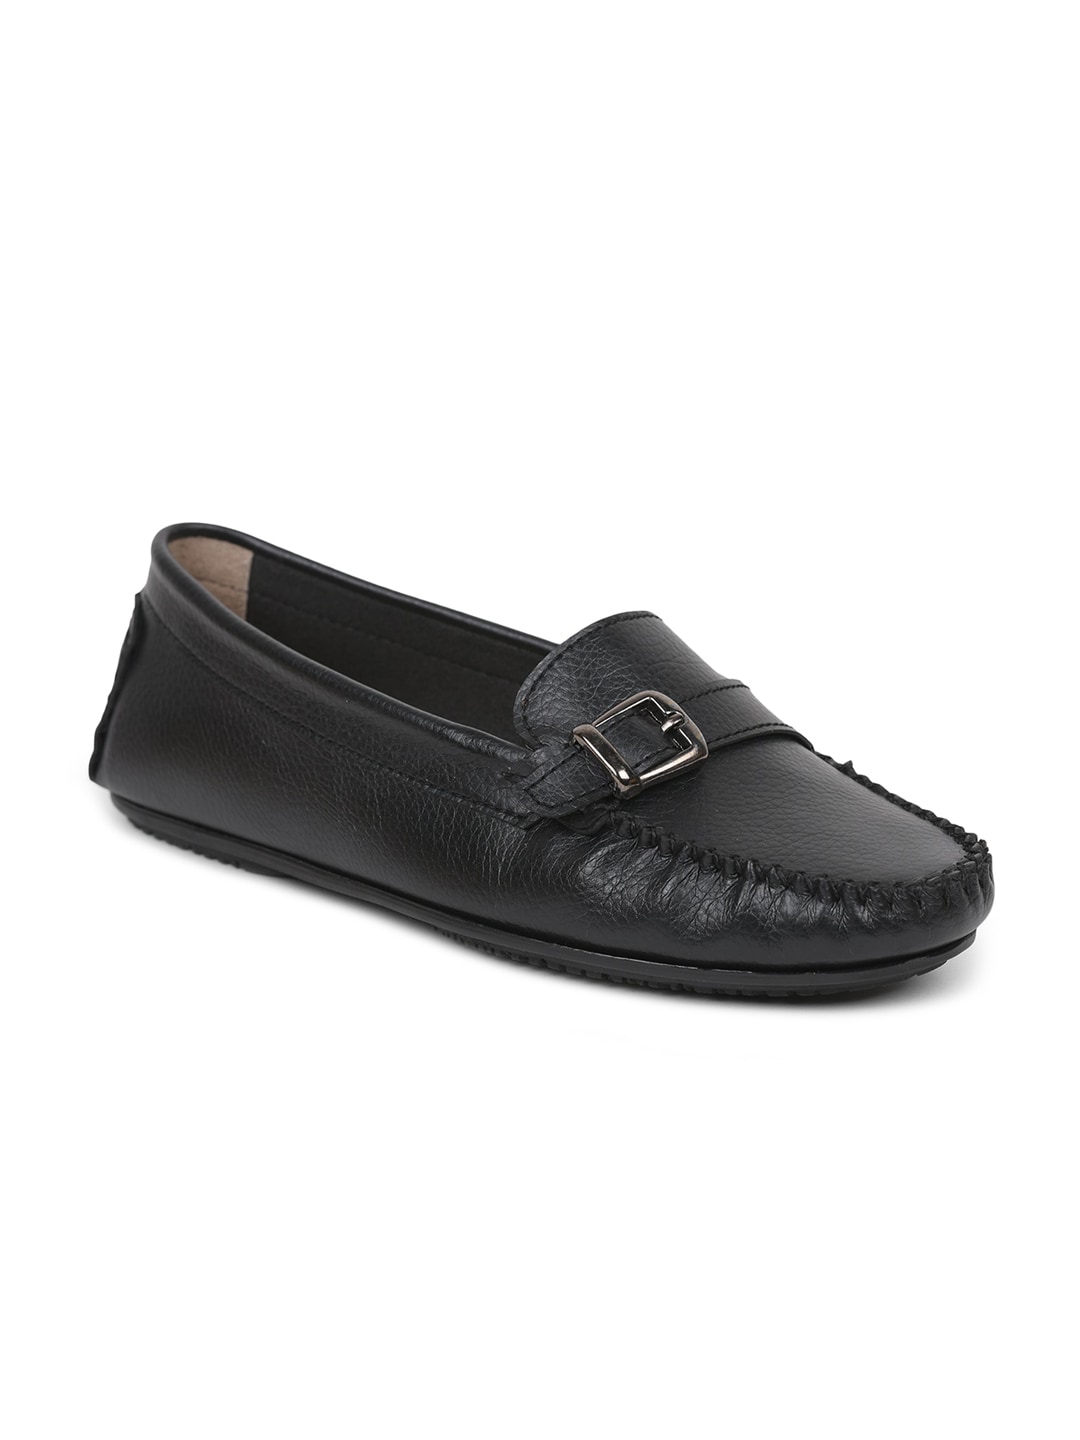 Liberty Women Black Loafers Price in India